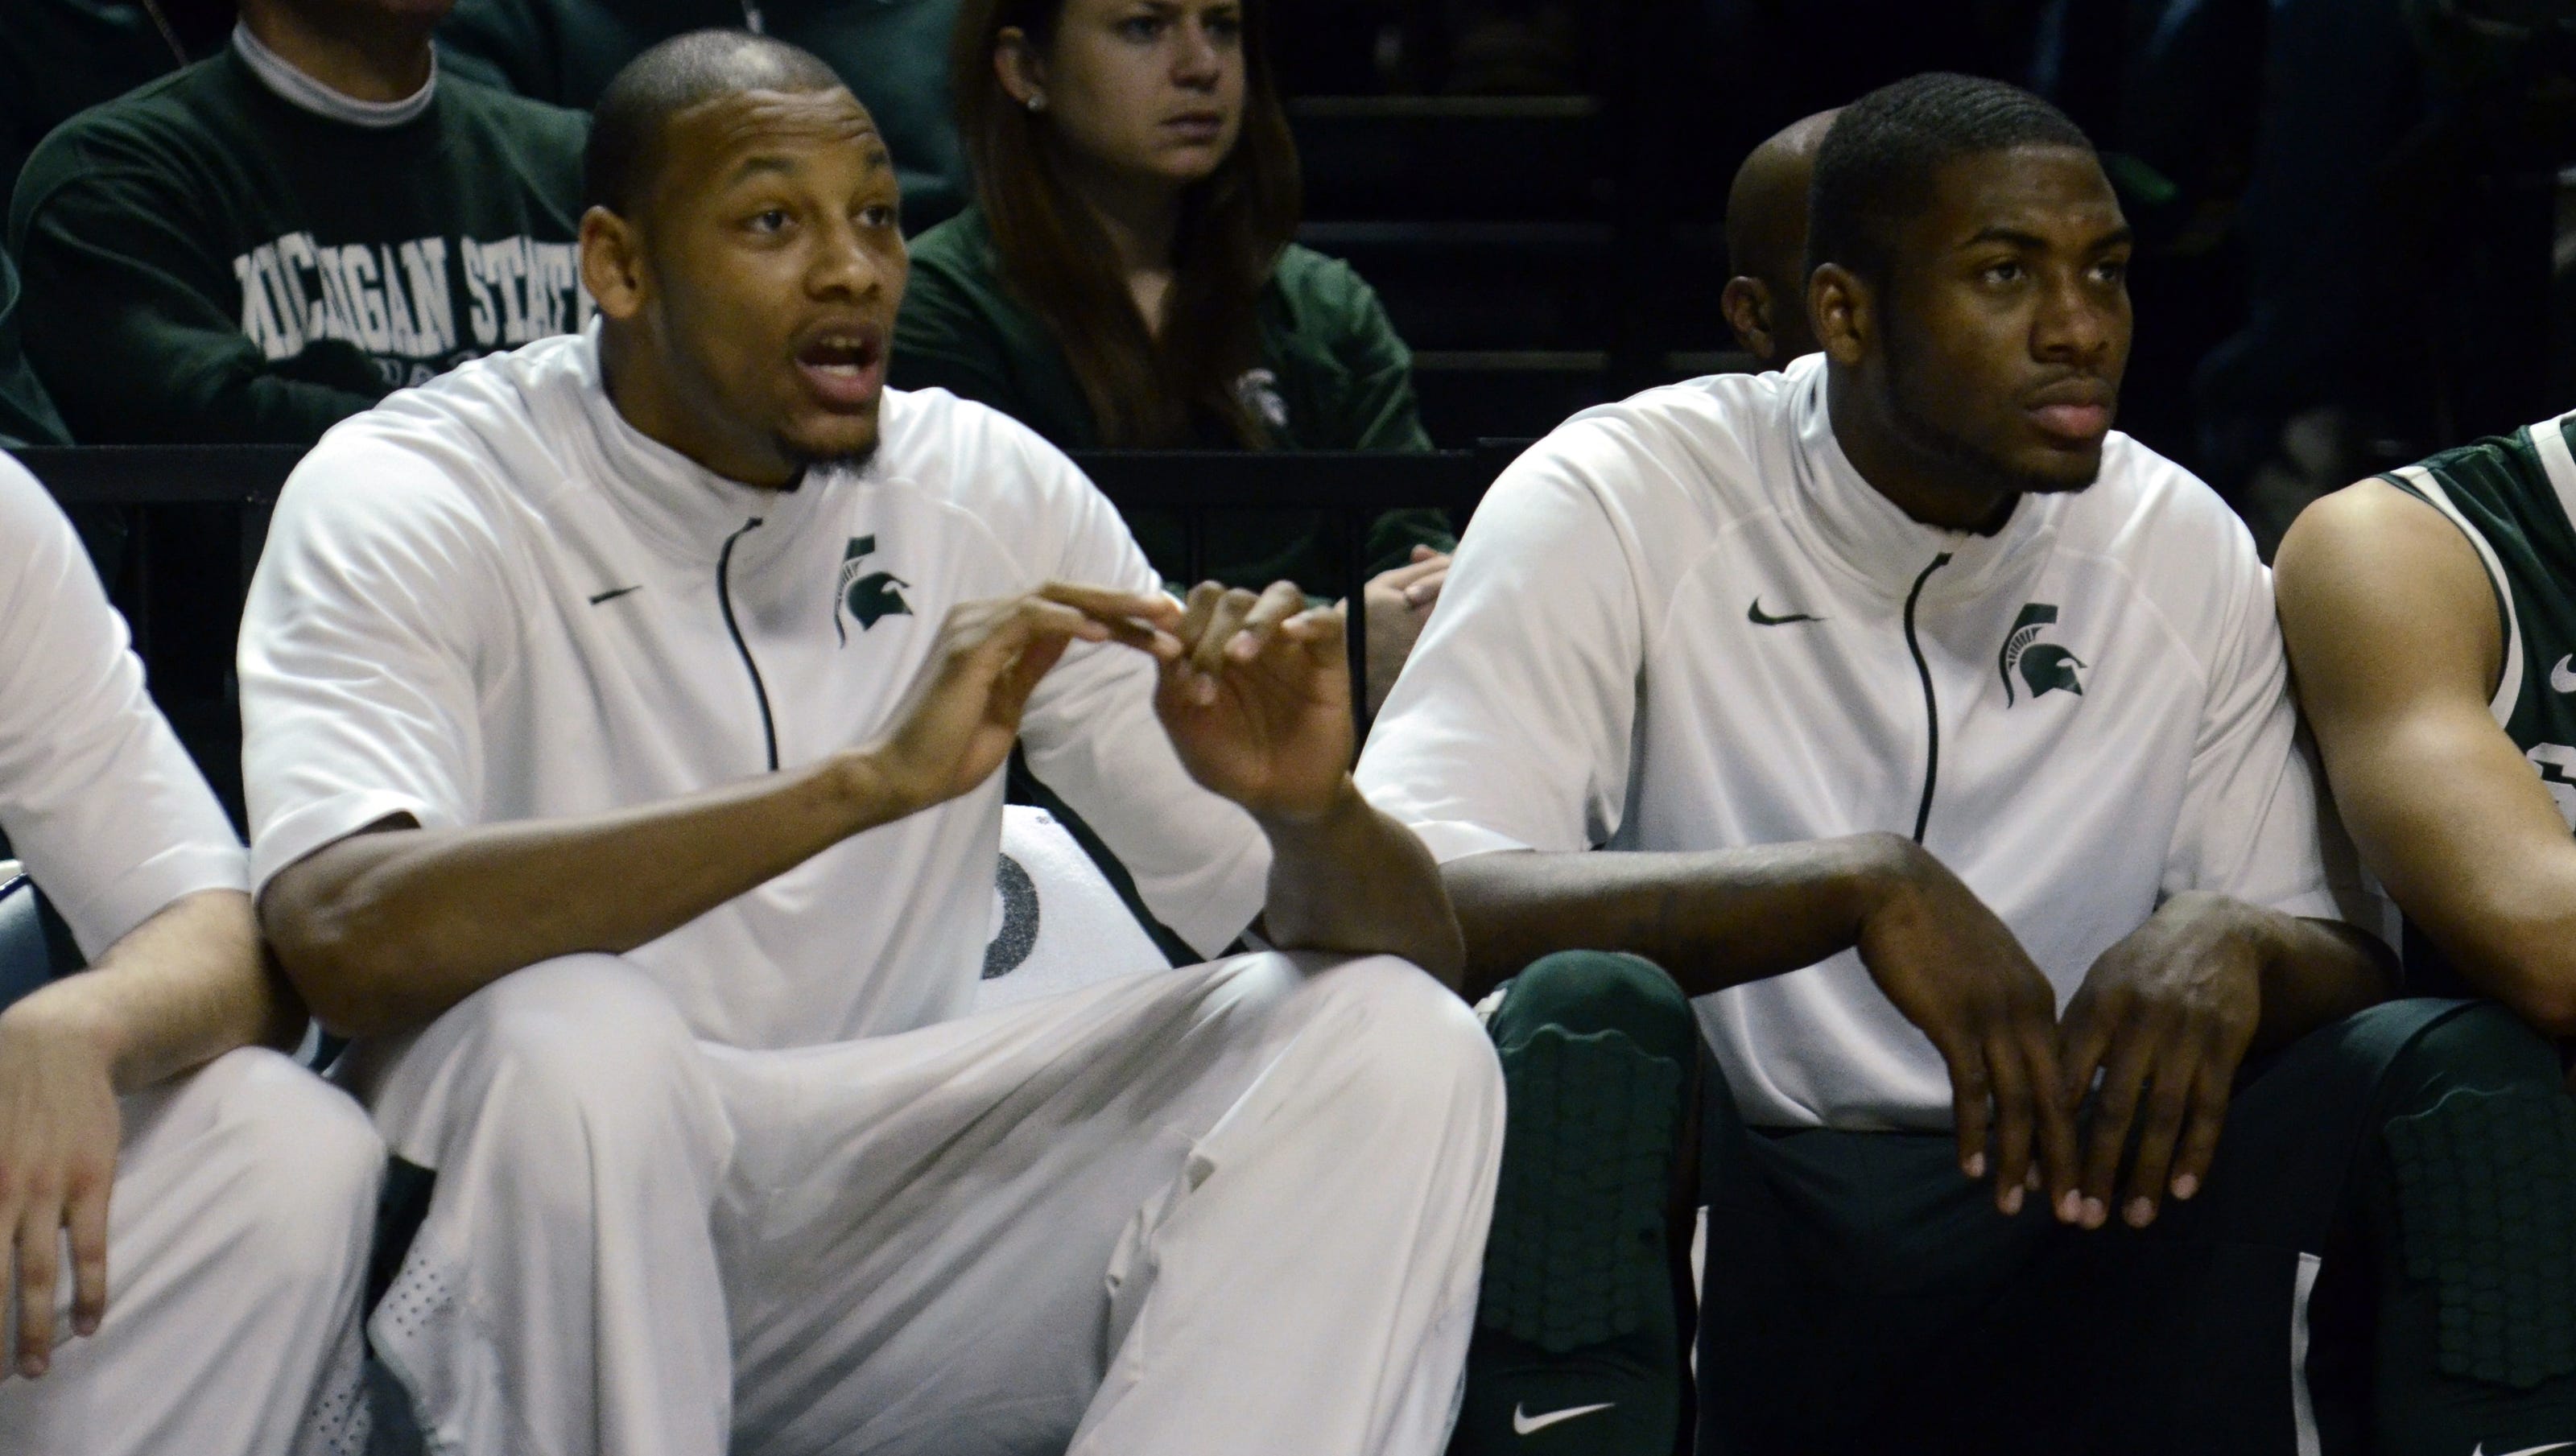 Punches thrown by Michigan State players in Penn State Inn fight